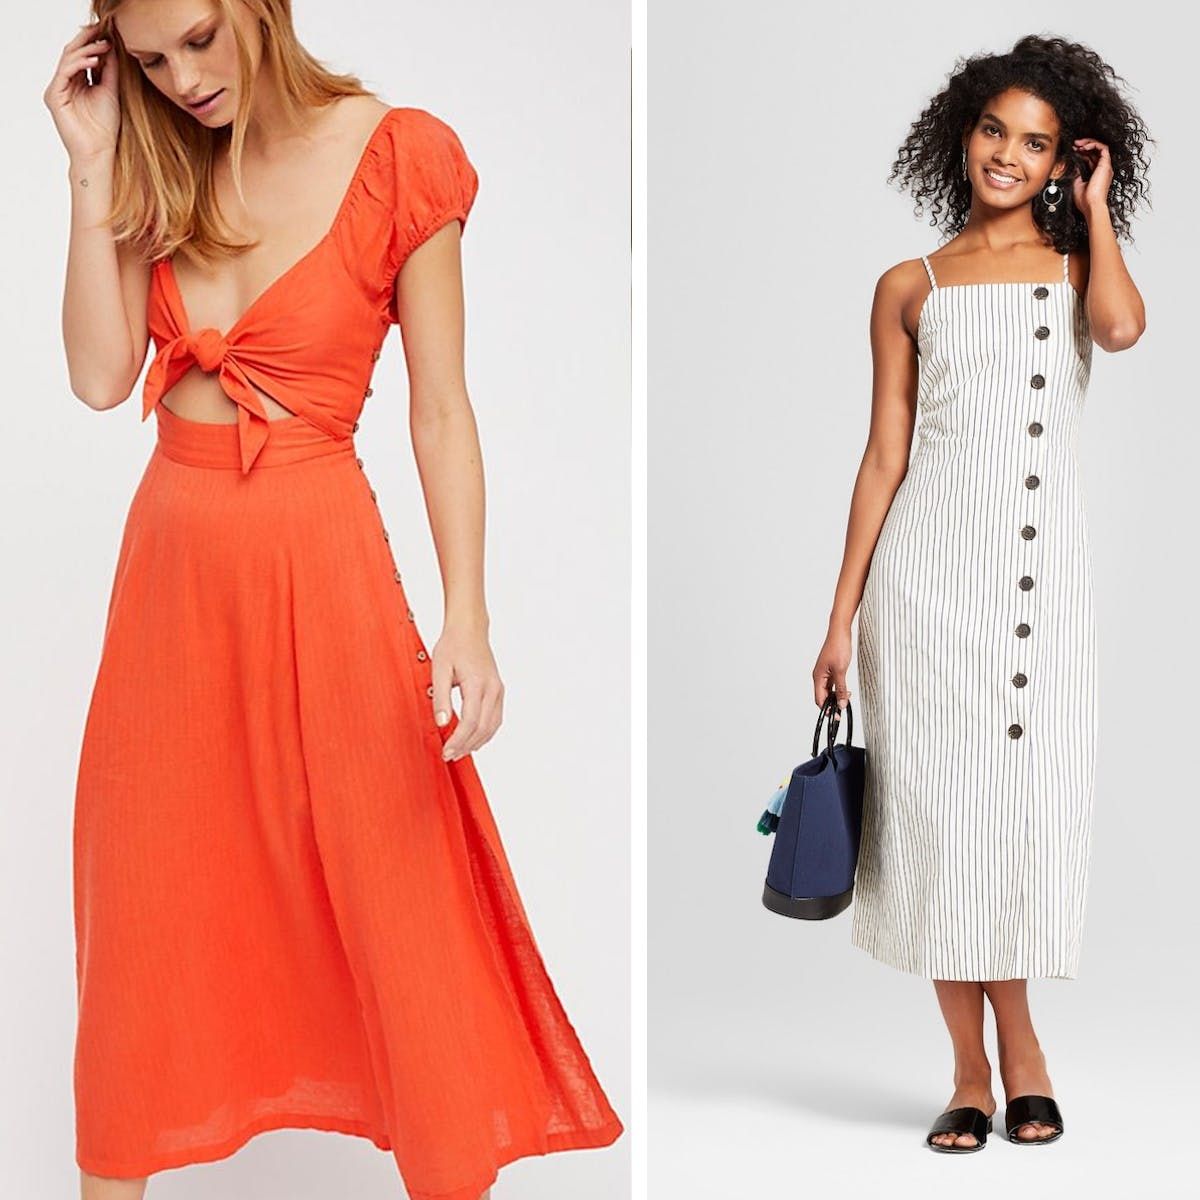 18 Side-Button Summer Fashion Buys to Shop Now